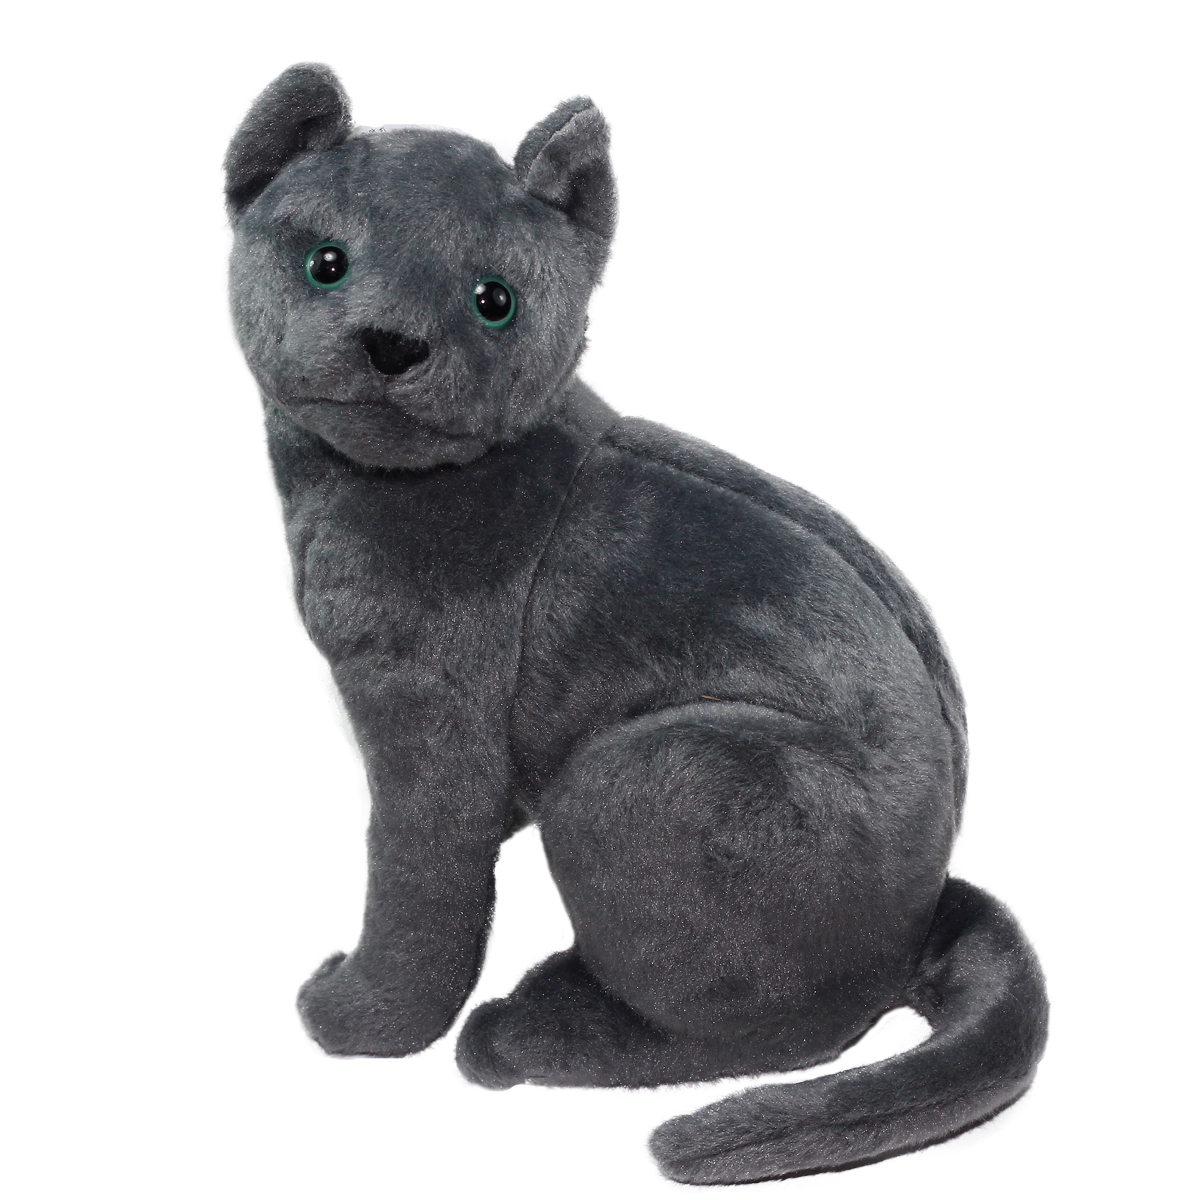 Real Cat Plush Collection Stuffed Animal Toy Dark Grey 10 Inches